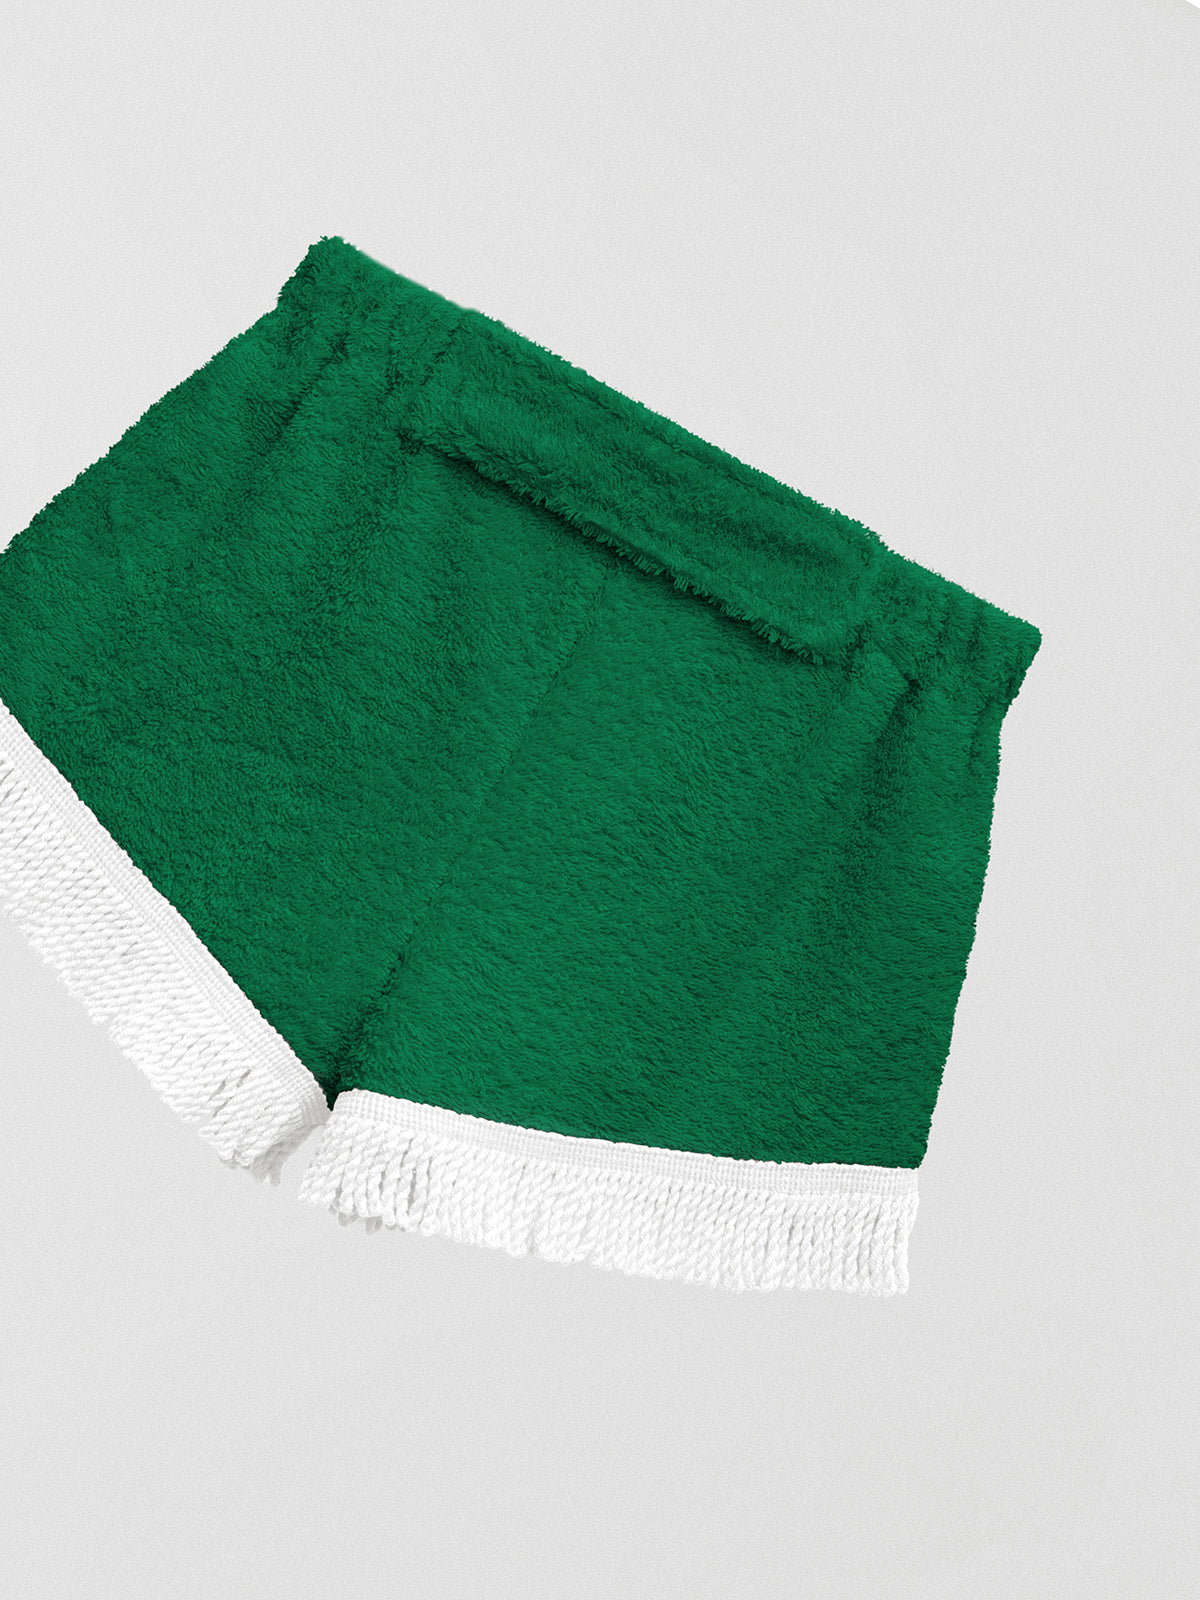 Towel shorts made in green cotton with white fringe.